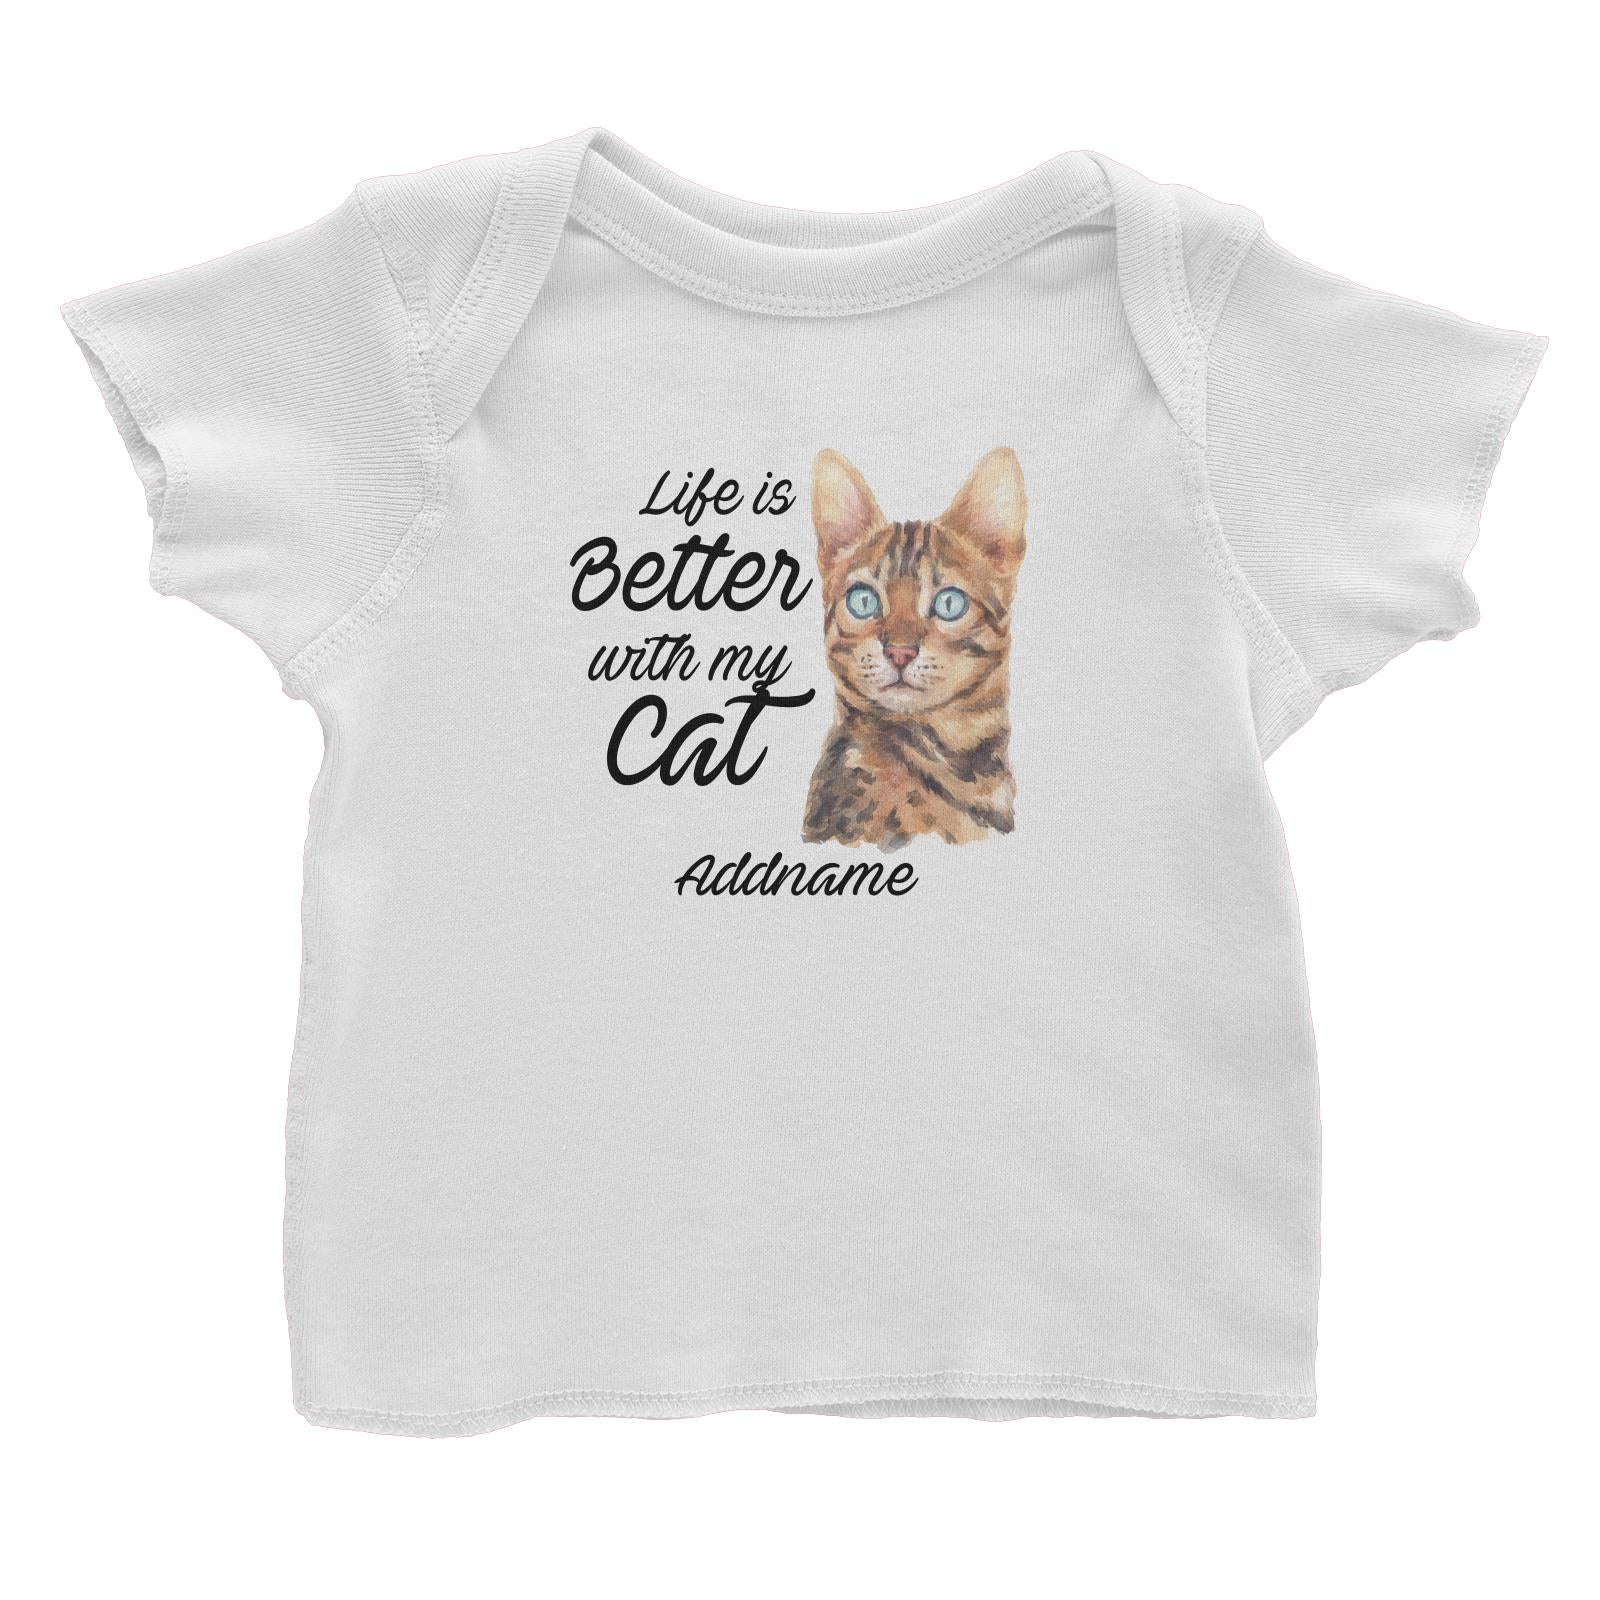 Watercolor Life is Better With My Cat Bengal Addname Baby T-Shirt